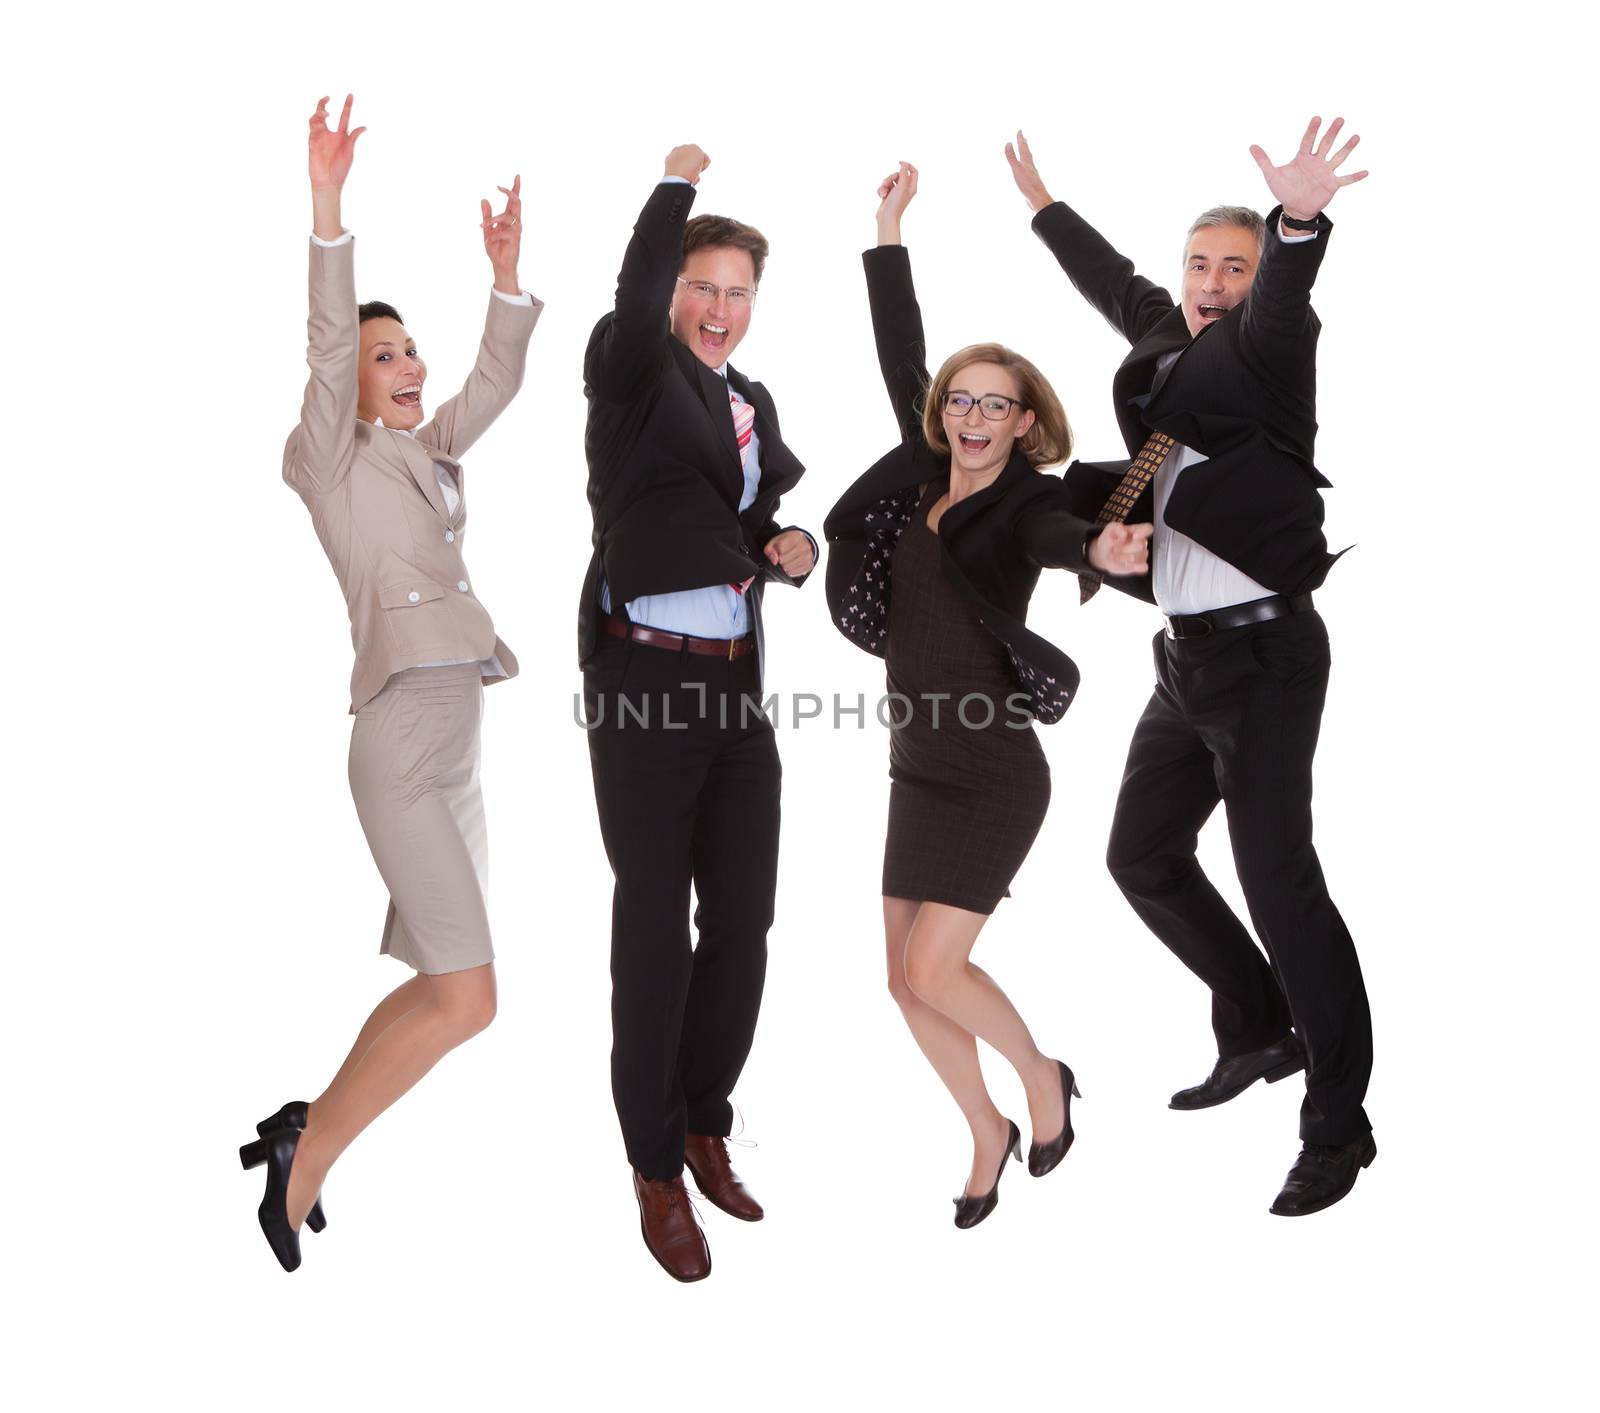 Four diverse professional business partners jumping for joy with their arms raised shouting in jubilation isolated on white